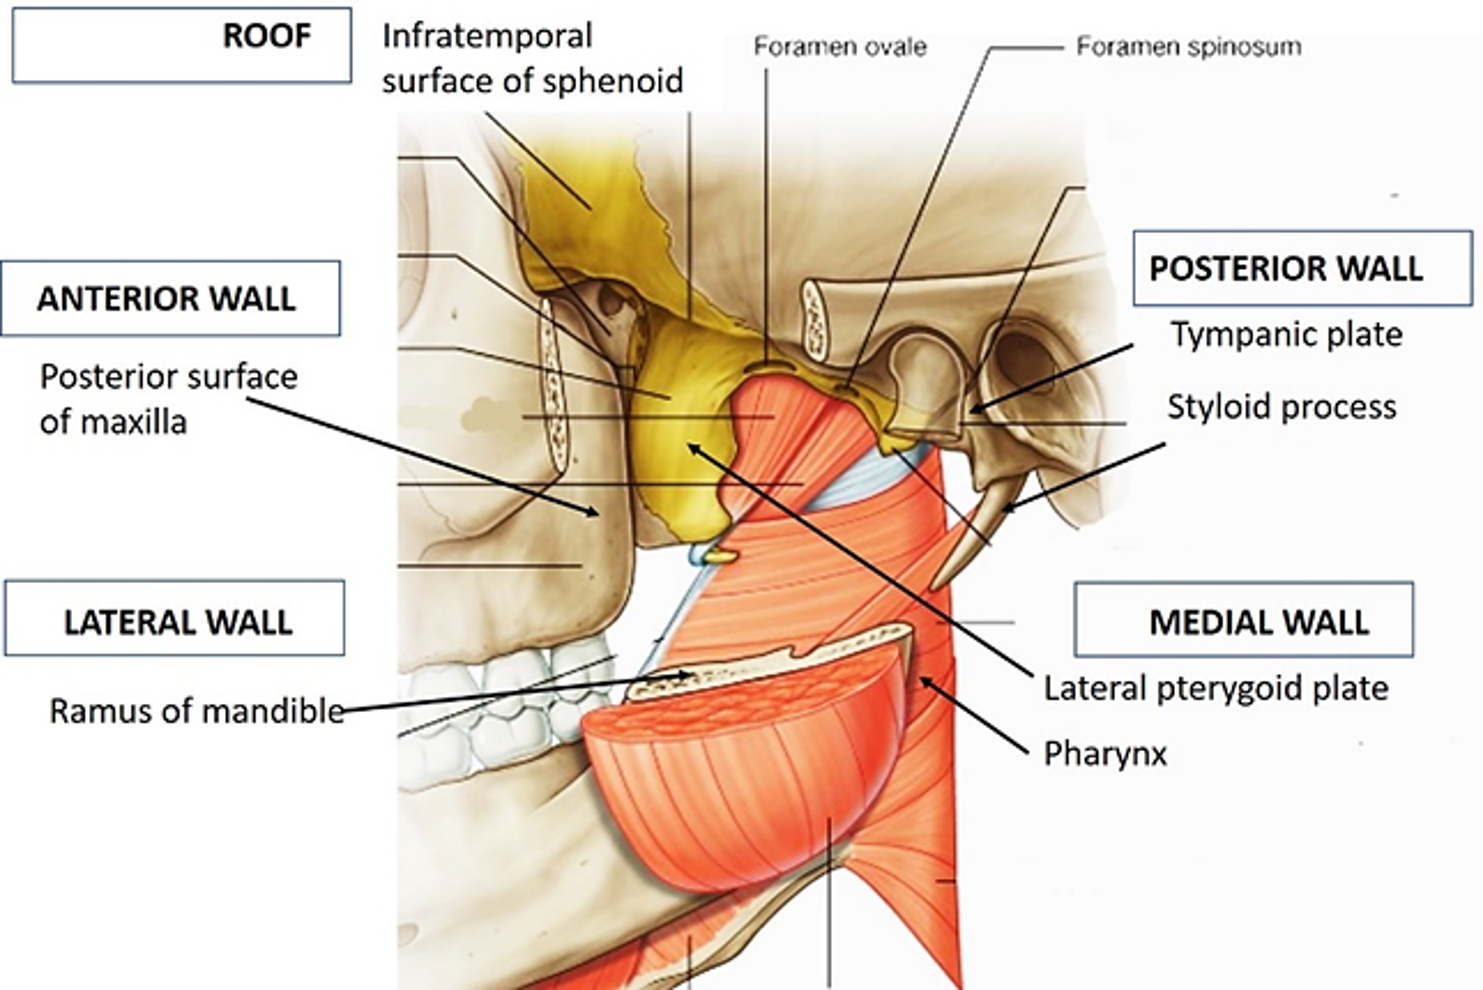 contents of infratemporal fossa